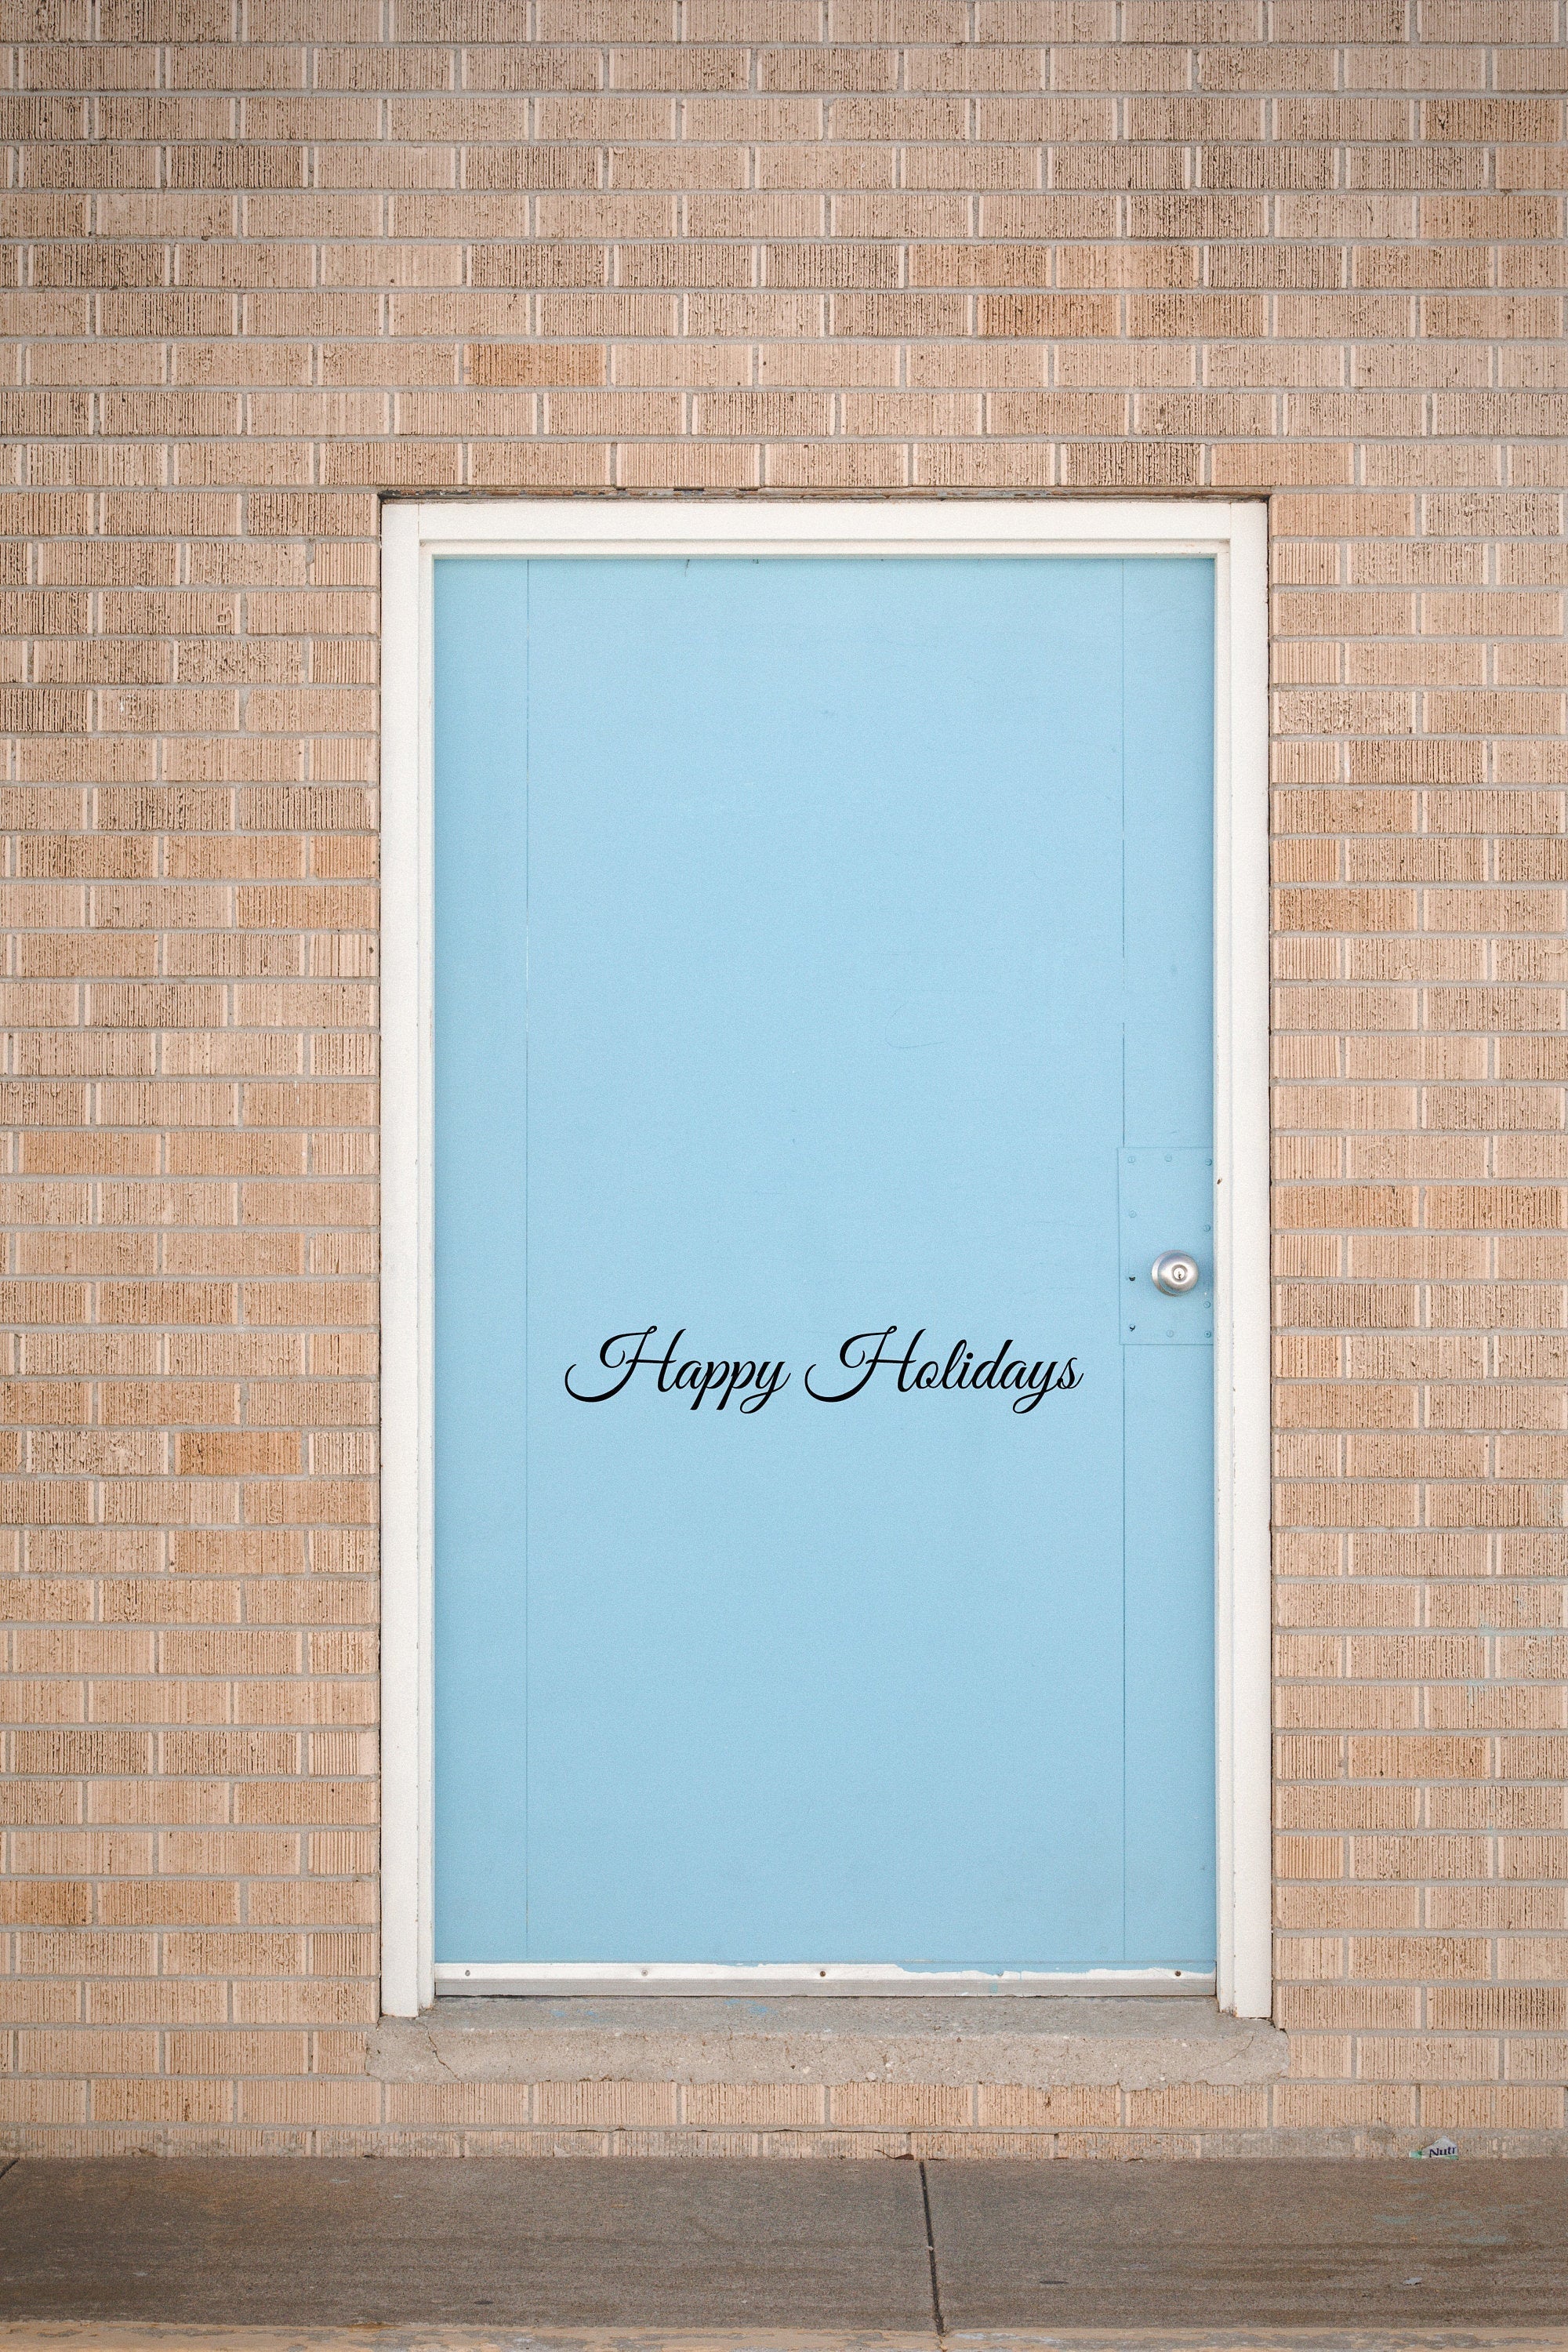 Happy Holidays Vinyl Decal for Christmas Decoration, Doors, Rooms, Kitchen, Wall Decor, & More, Horizontal Sticker!